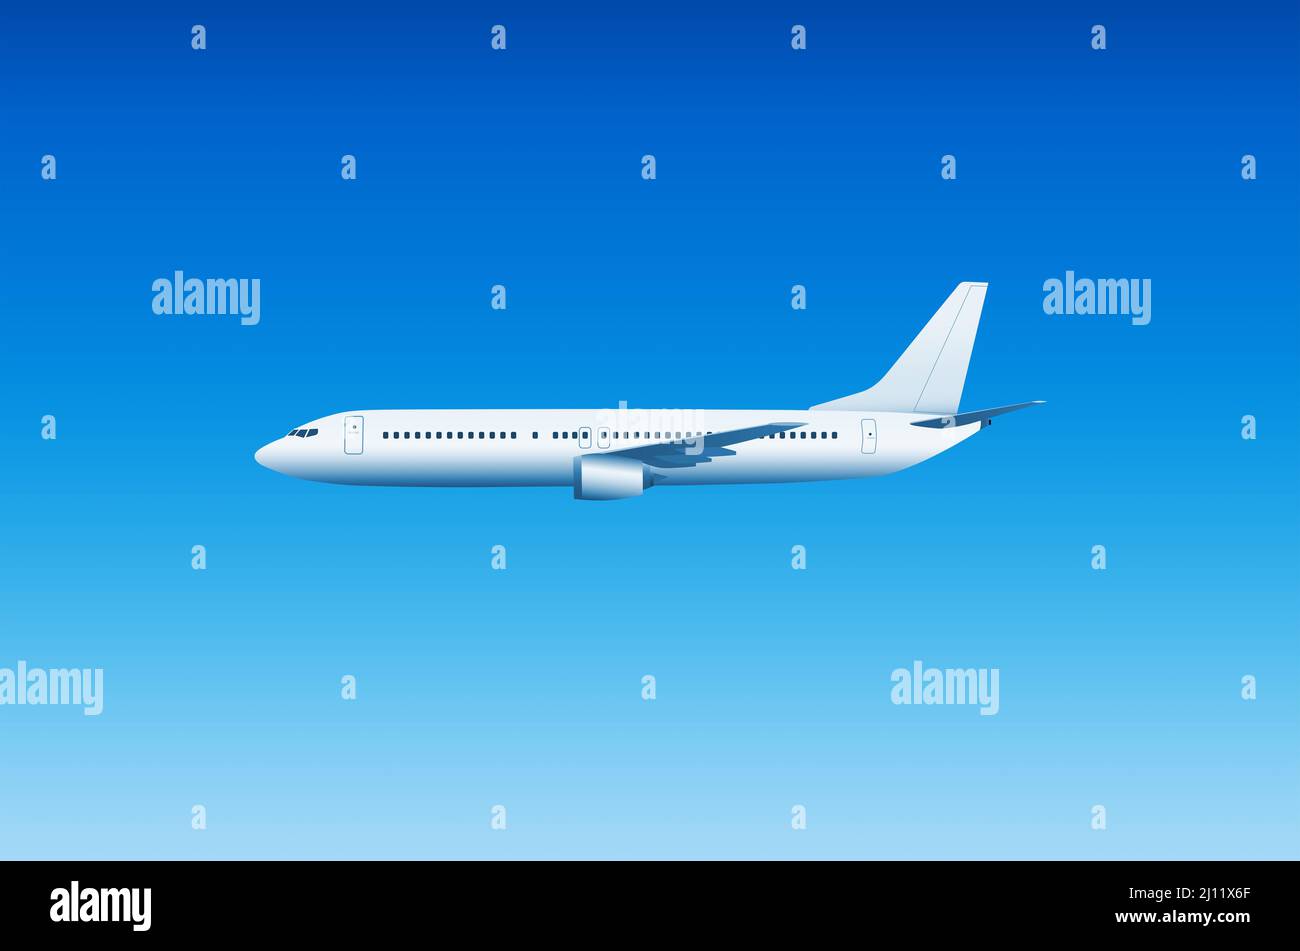 Commercial airplane with blue sky background - Illustration Stock Photo